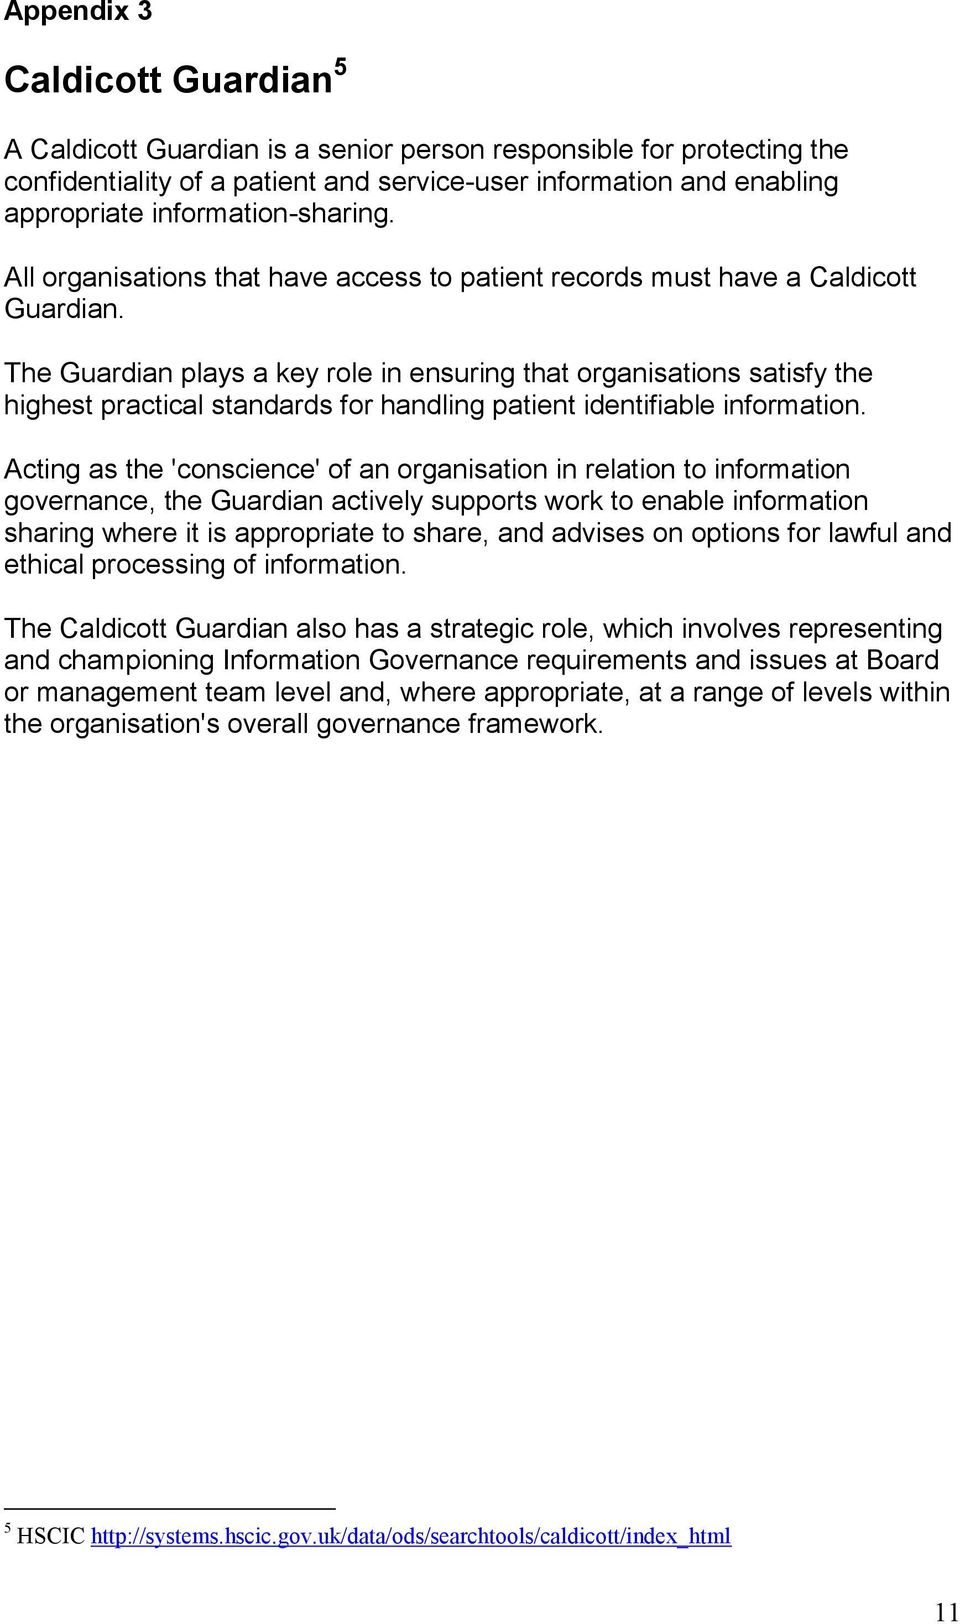 The Guardian plays a key role in ensuring that organisations satisfy the highest practical standards for handling patient identifiable information.